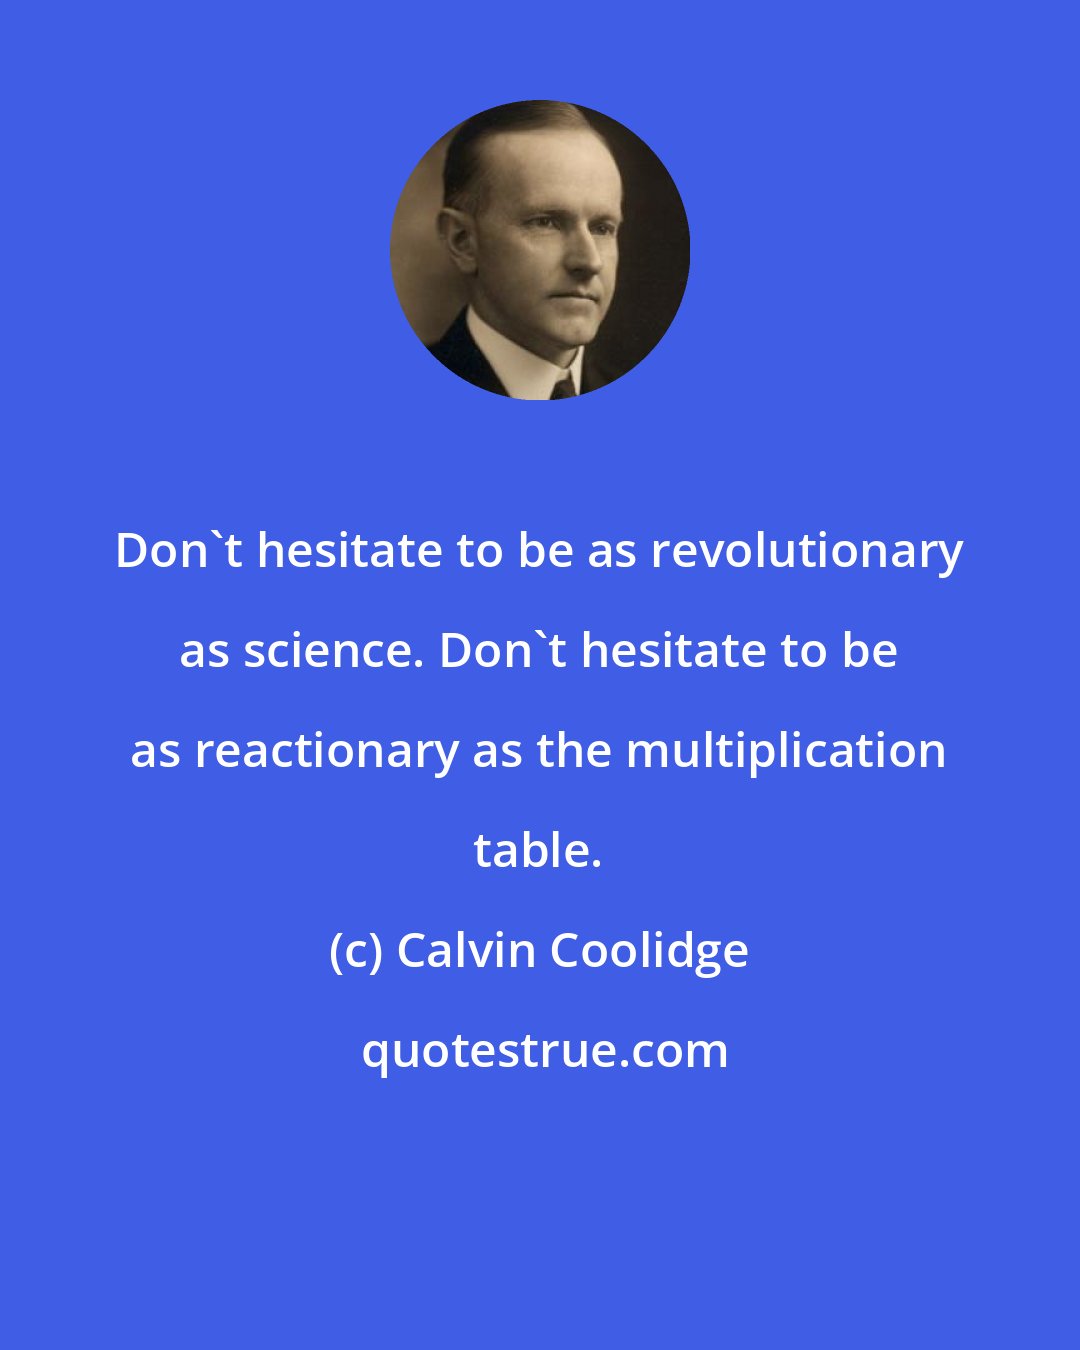 Calvin Coolidge: Don't hesitate to be as revolutionary as science. Don't hesitate to be as reactionary as the multiplication table.